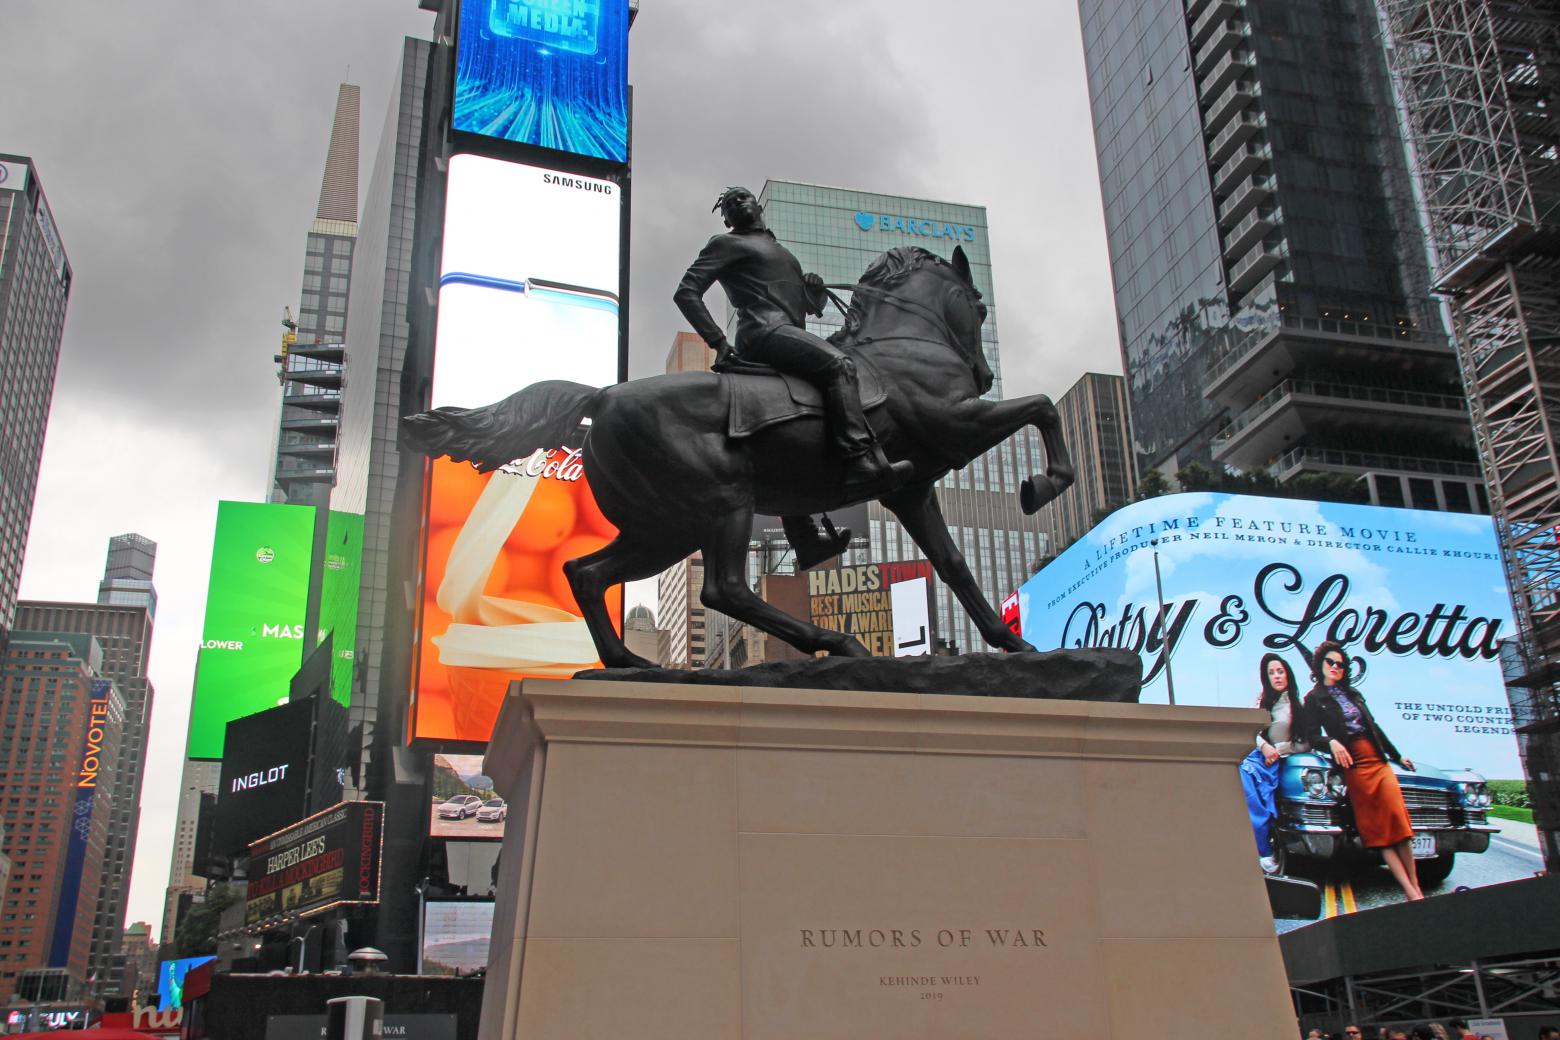  Kehinde Wileys Monument "Rumors of a War" auf dem New Yorker Times Square